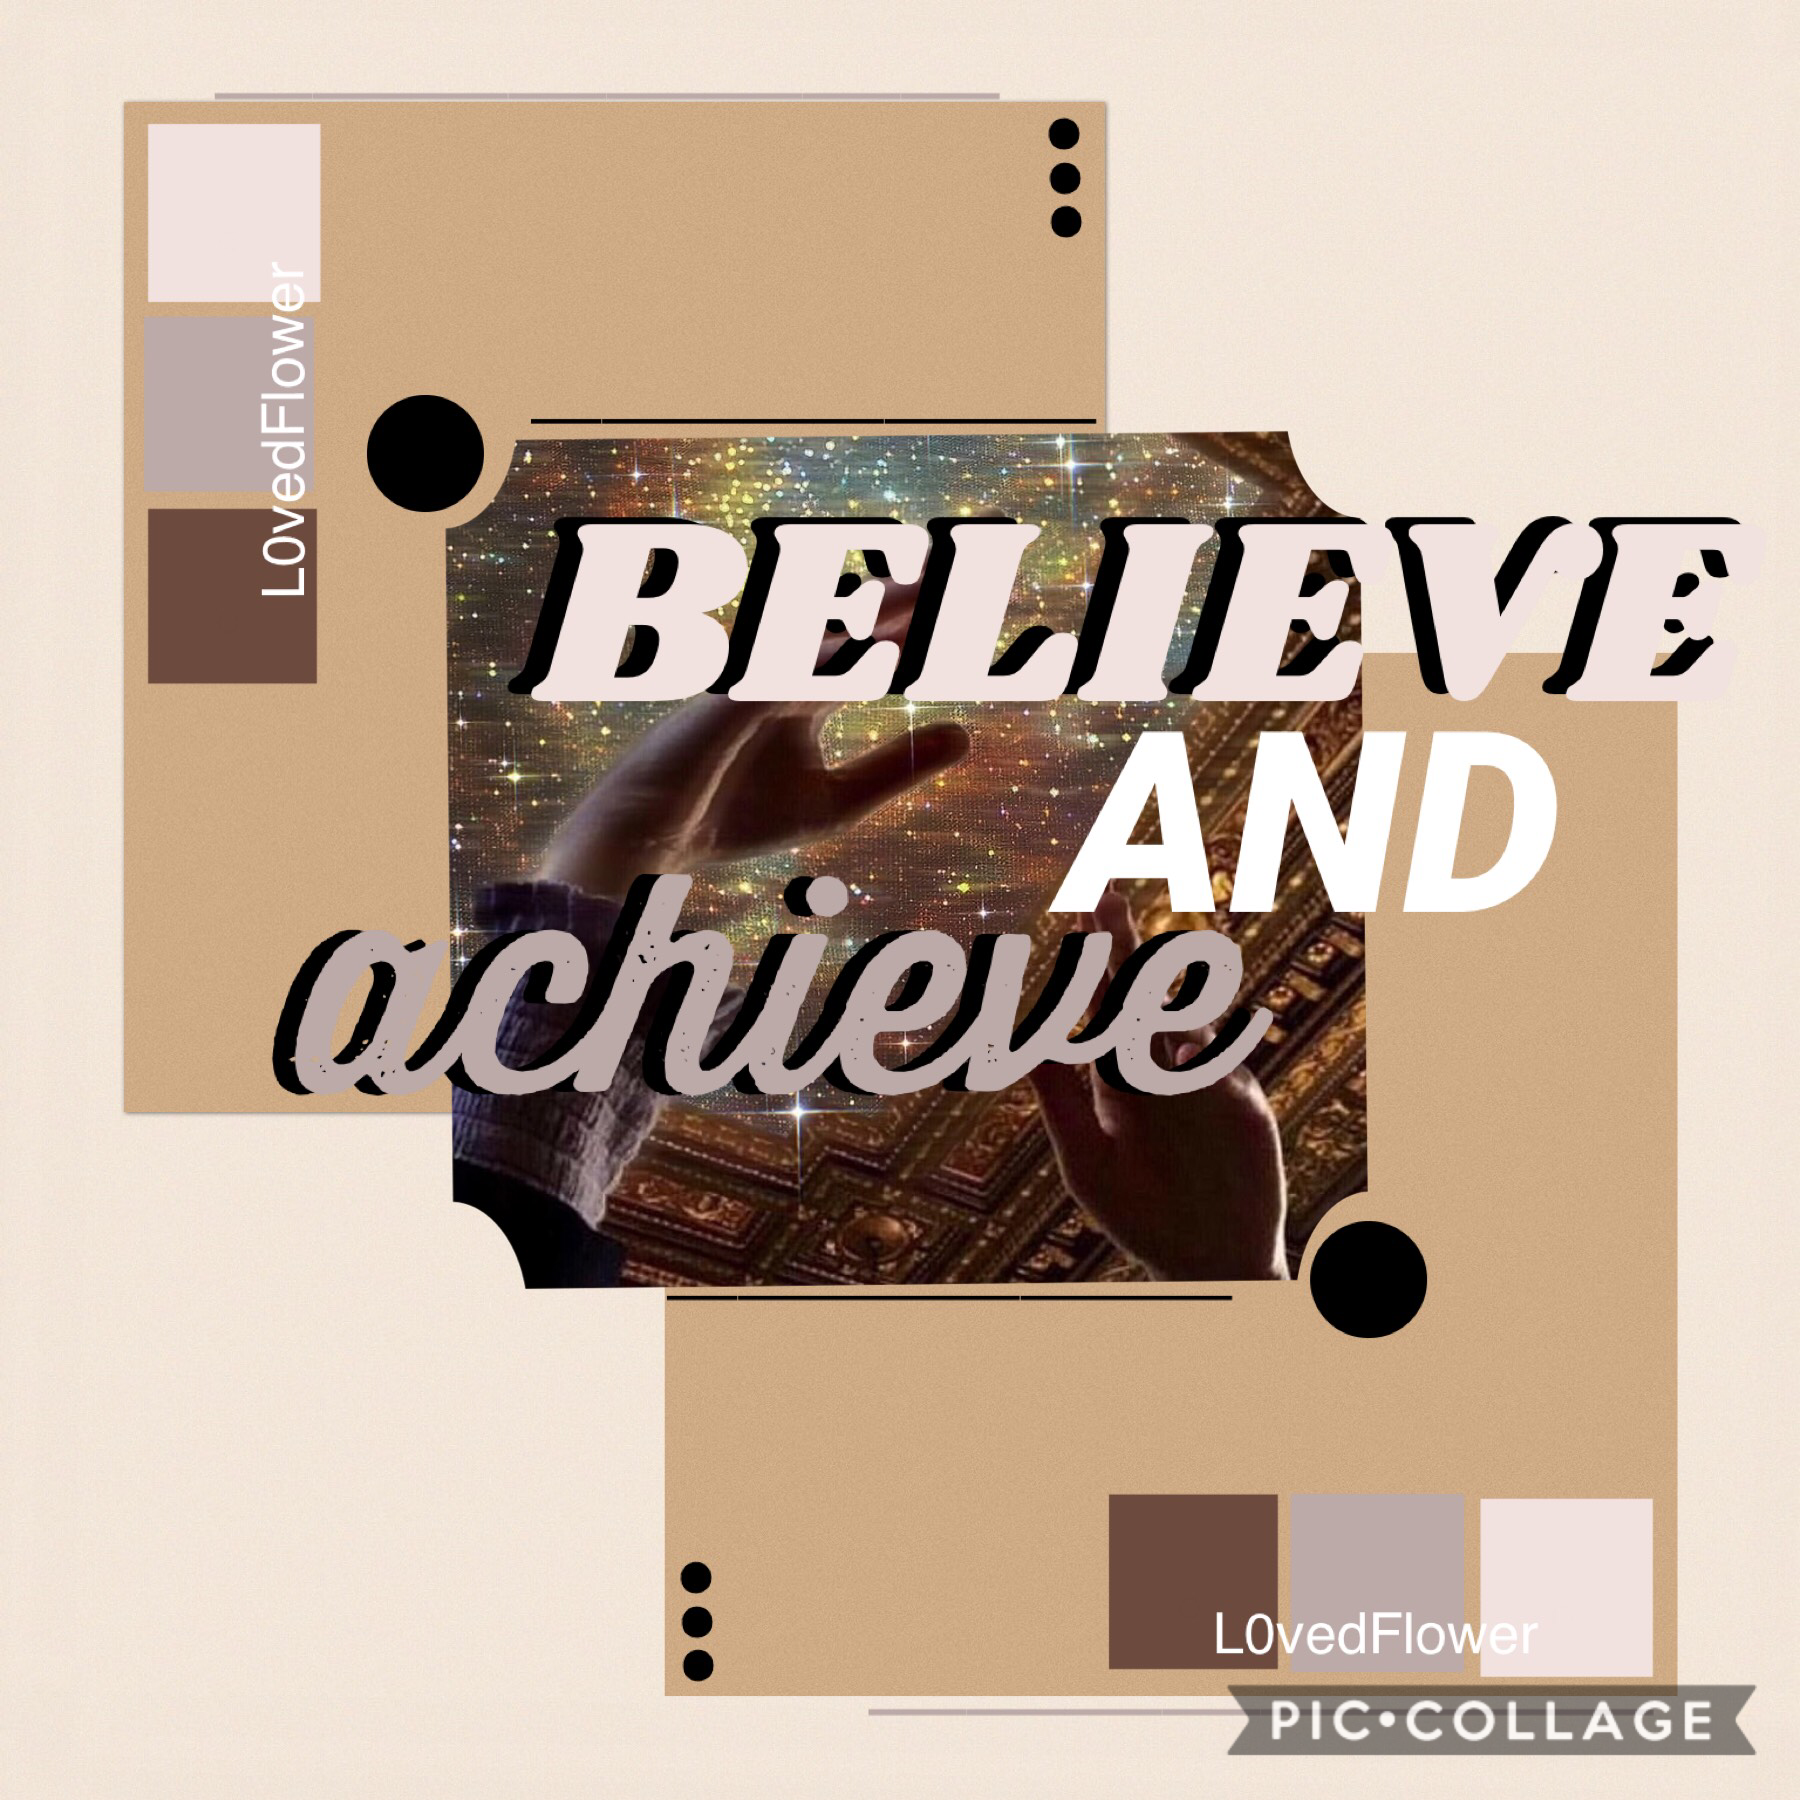 ✰ [click] ✰
✰ so I thought of this quote.. i just randomly thought of this quote ✰
✰ “Believe and achieve”✰
✰ if you believe in yourself you can do whatever you set your mind to, ✰